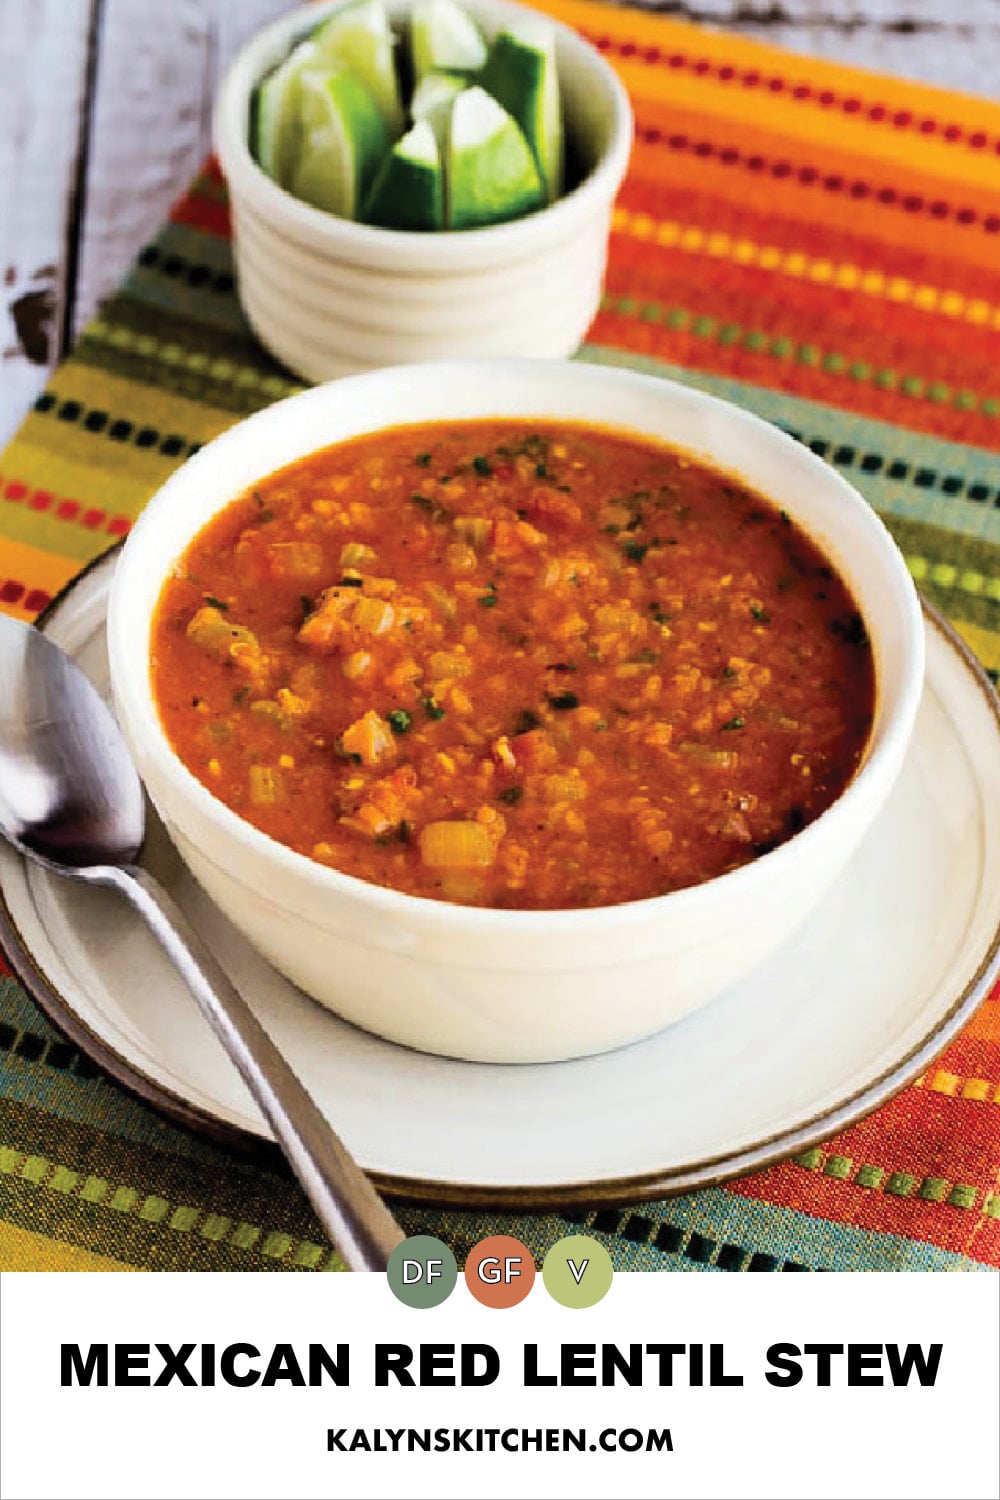 Pinterest image of Mexican Red Lentil Stew